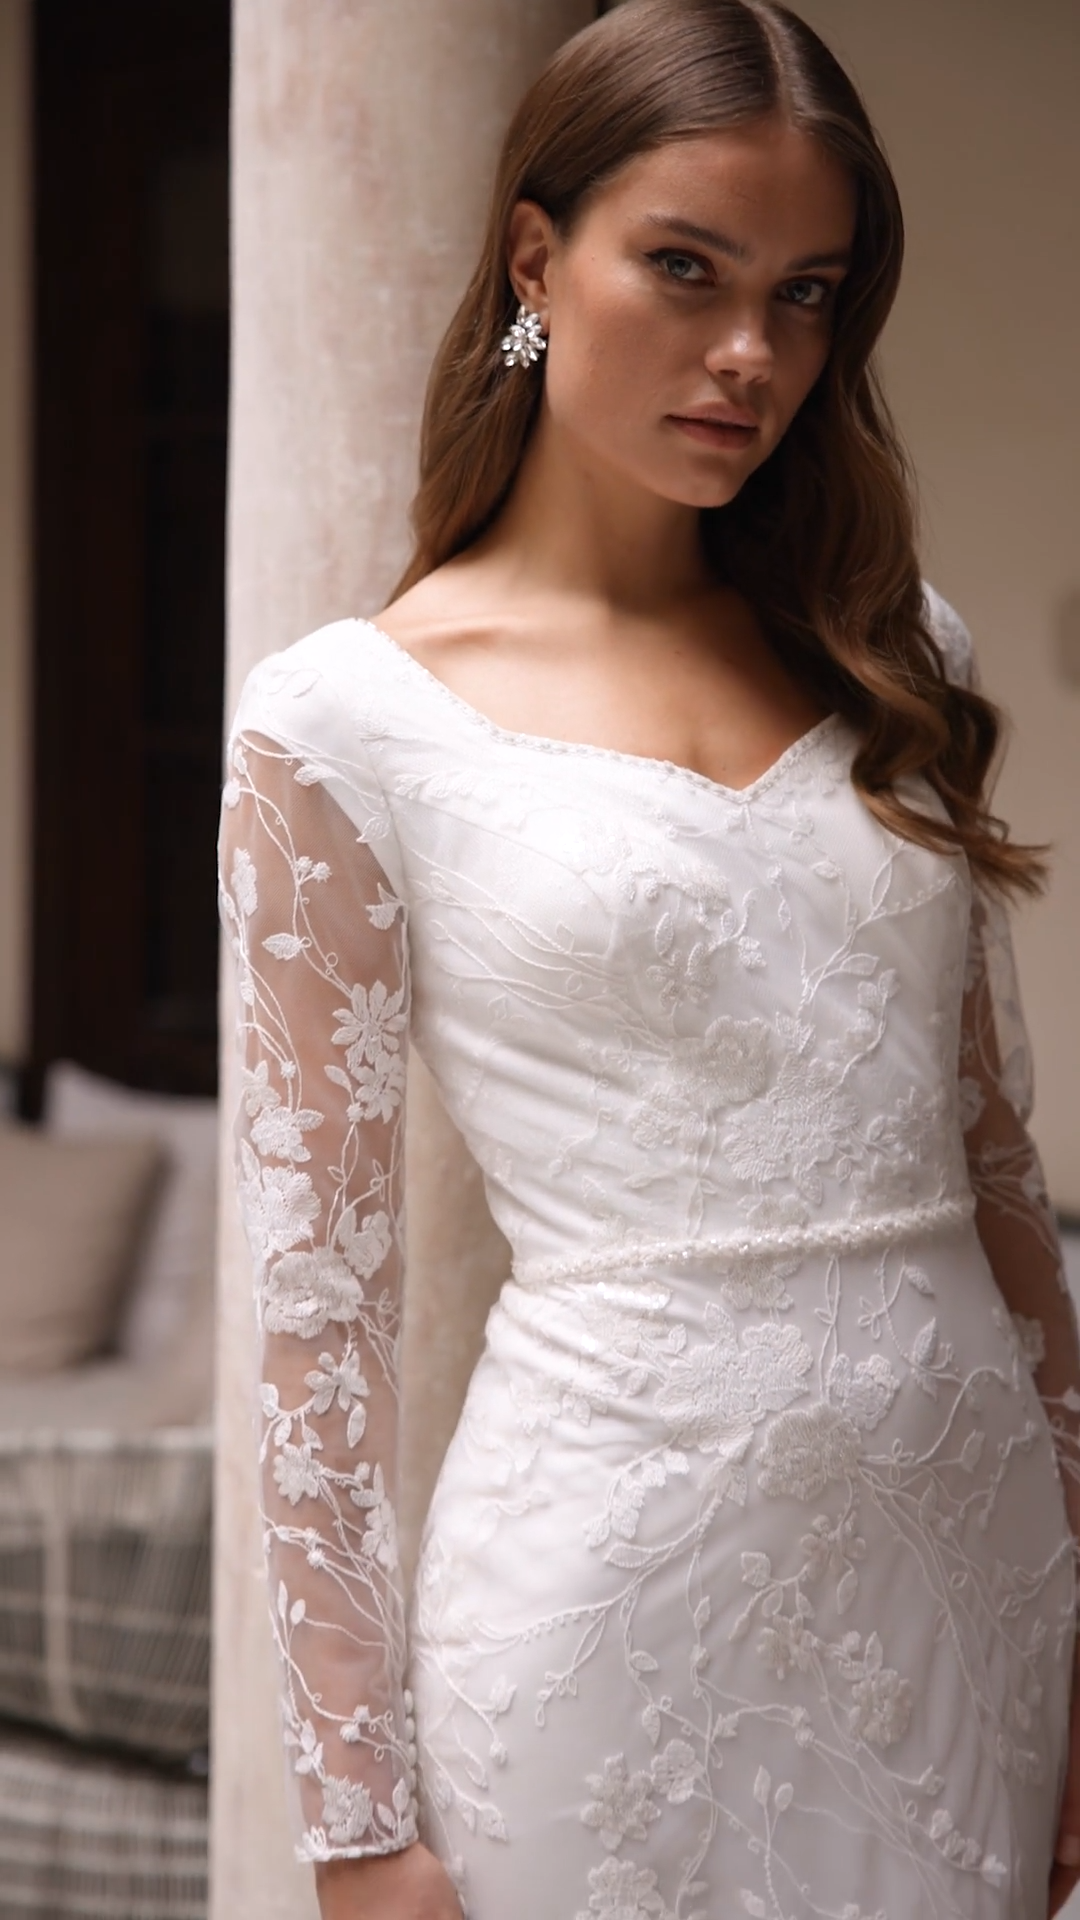 Modest Floral Lace Mermaid Wedding Dress With Sweetheart Neckline and Illusion Long Sleeves Style M5076